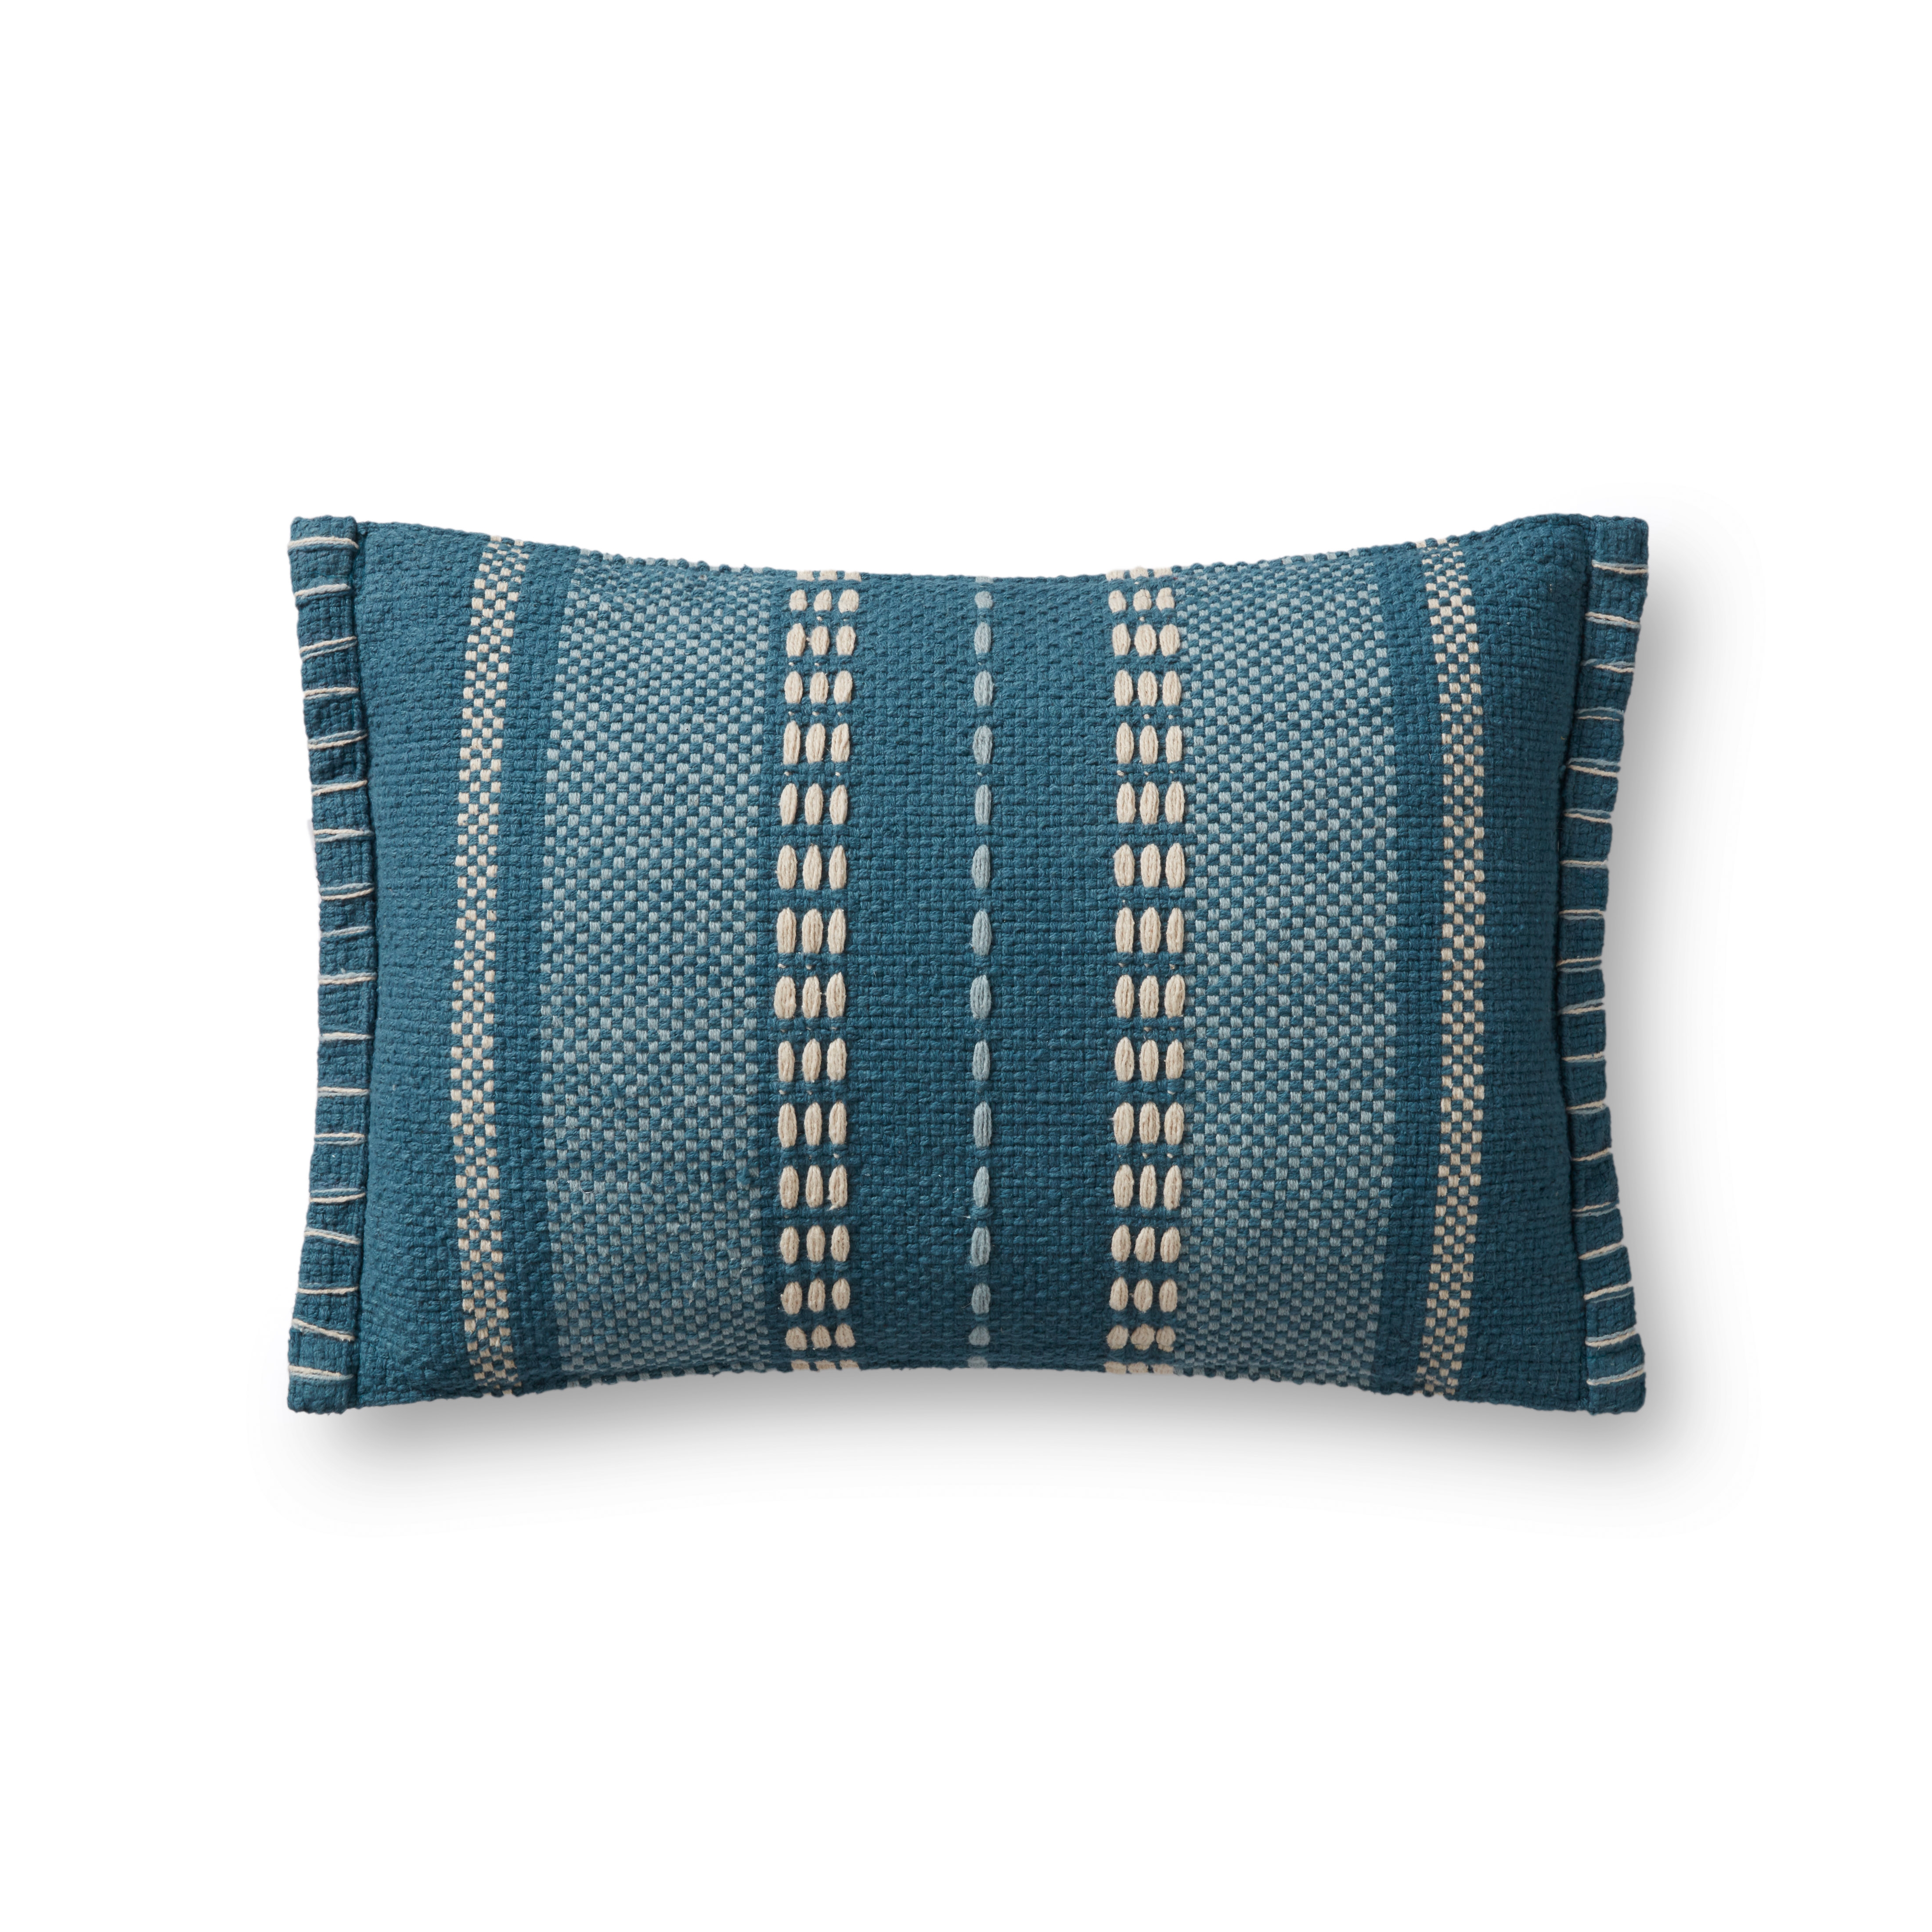 Basketweave Stitched Throw Pillow, Blue, 21" x 13" - Image 0